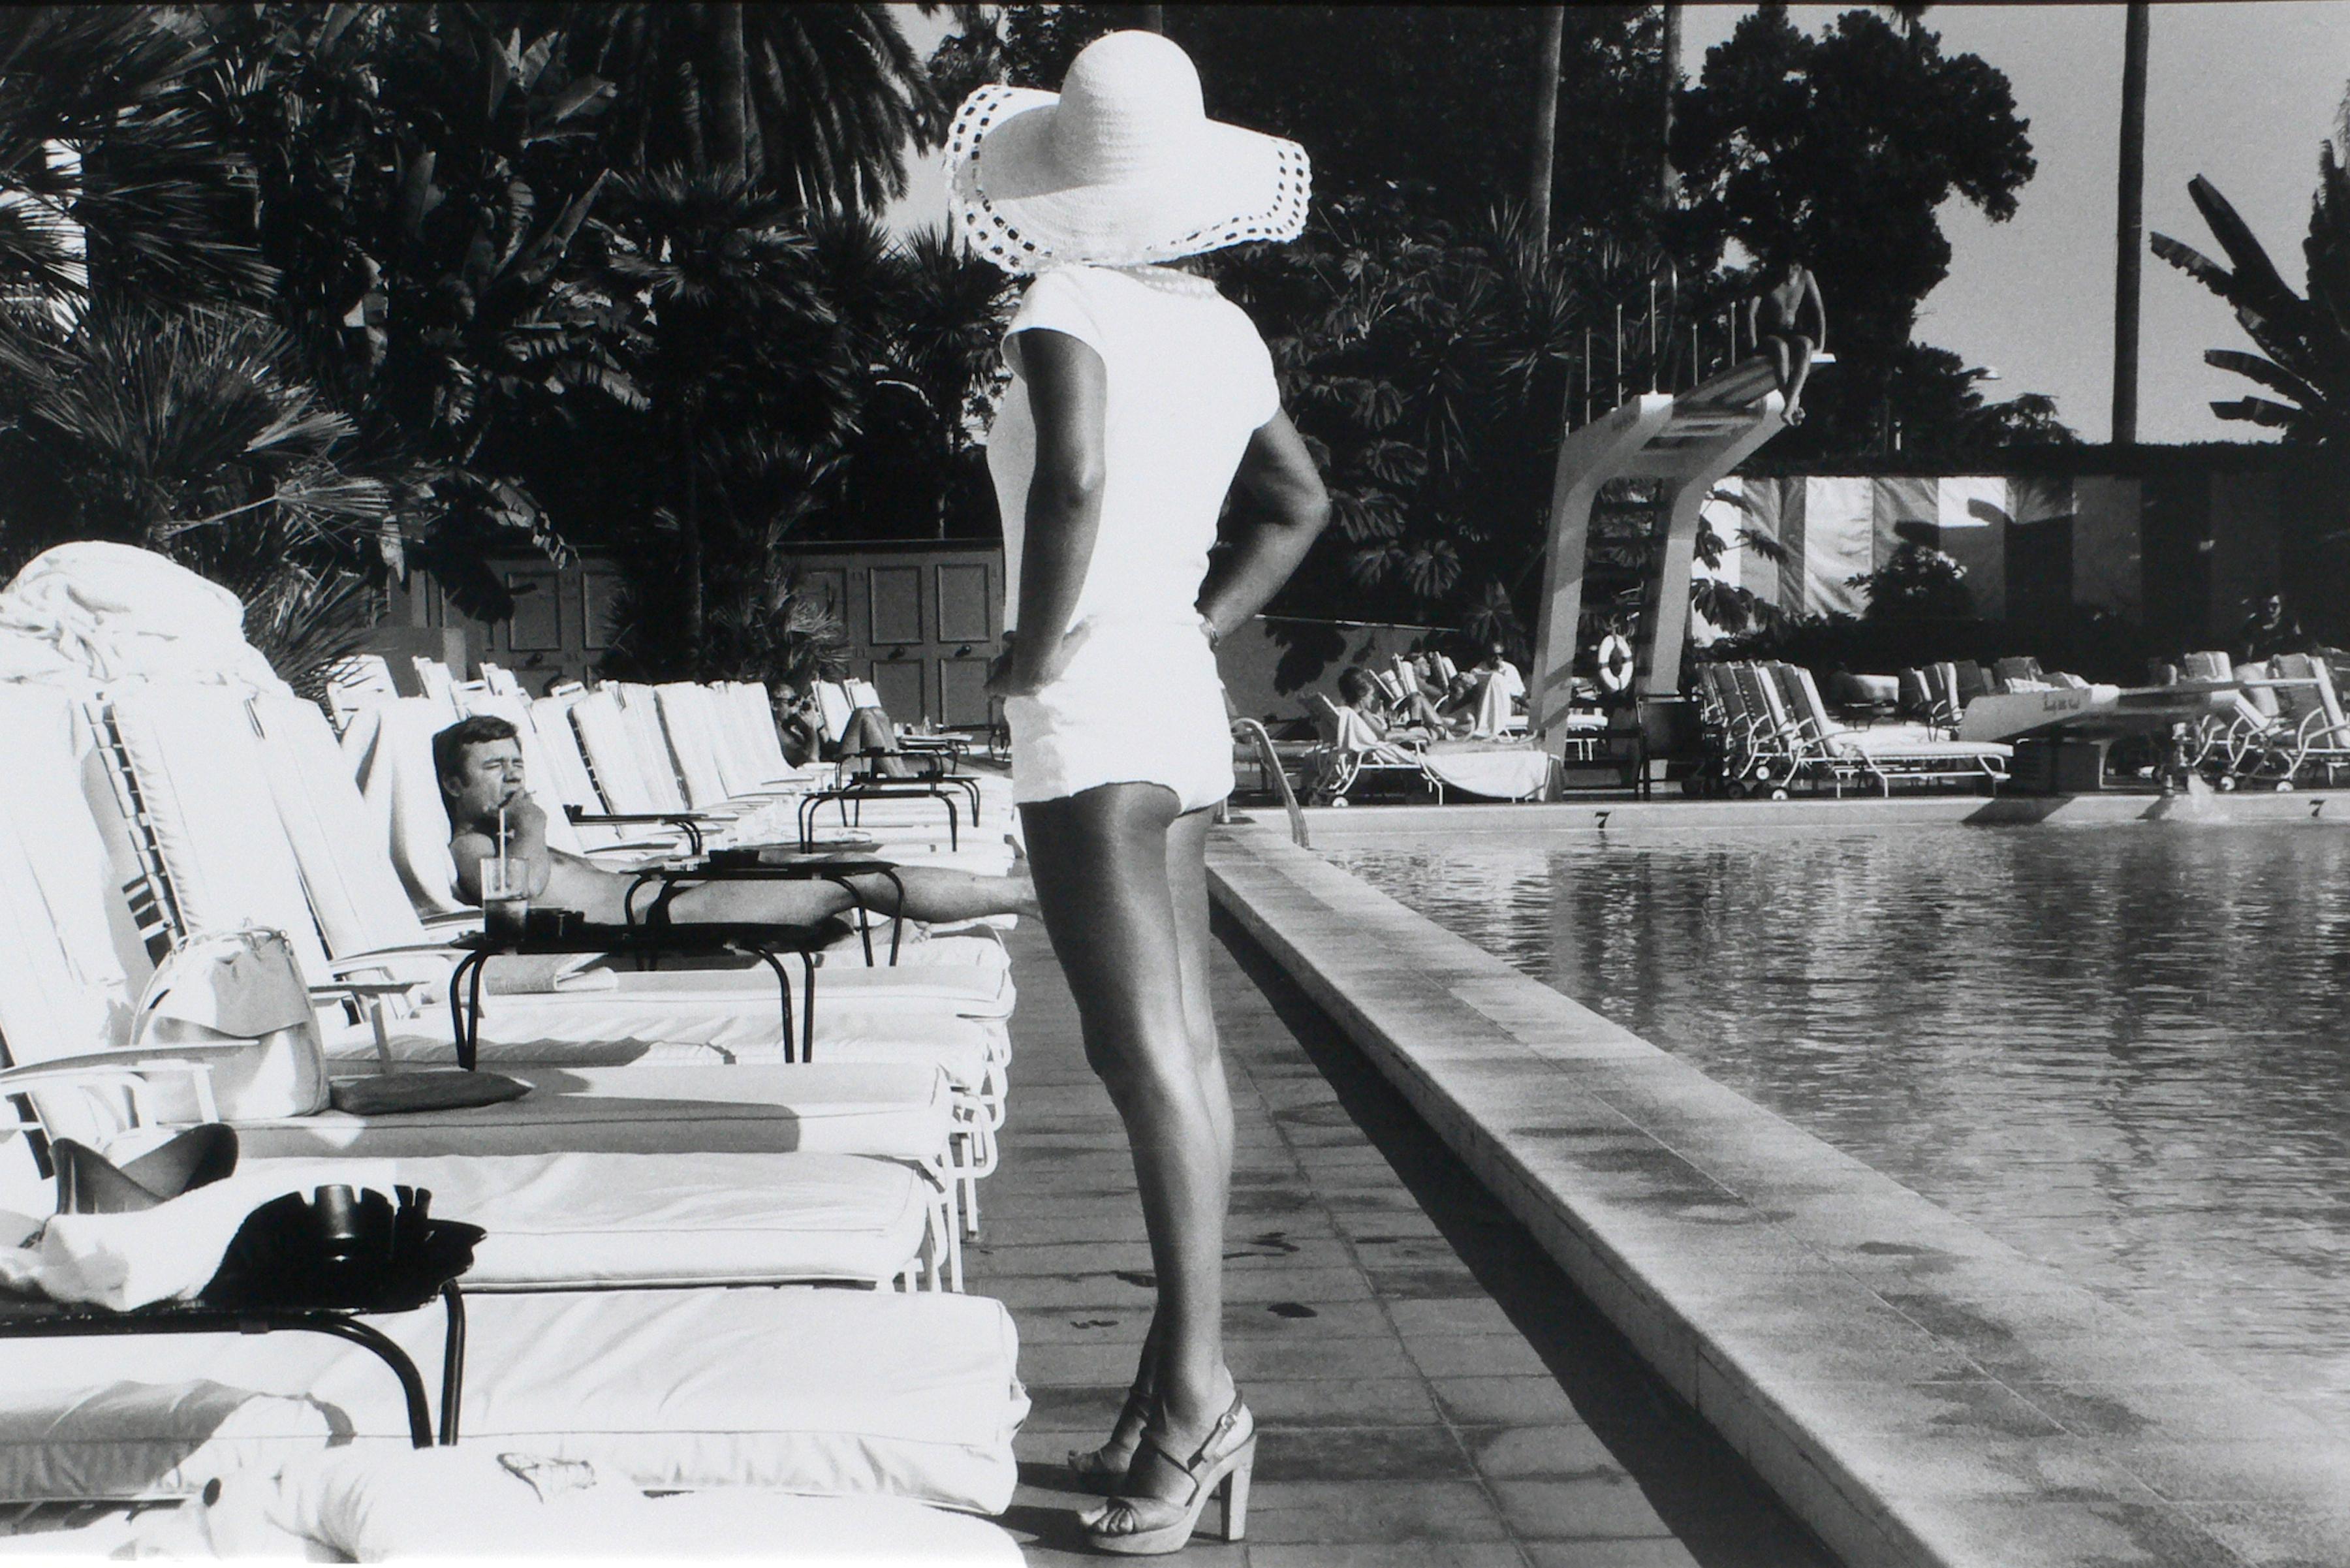 Anthony FRIEDKIN (*1949, America)
Woman by the Pool, Beverly Hills Hotel, Beverly Hills, California, U.S.A., 1975
Silver Gelatin Print, later print
40.6 x 50.8 cm (16 x 20 in.)
Edition of 25
Print only

Born 1949 in Los Angeles, USA, Friedkin